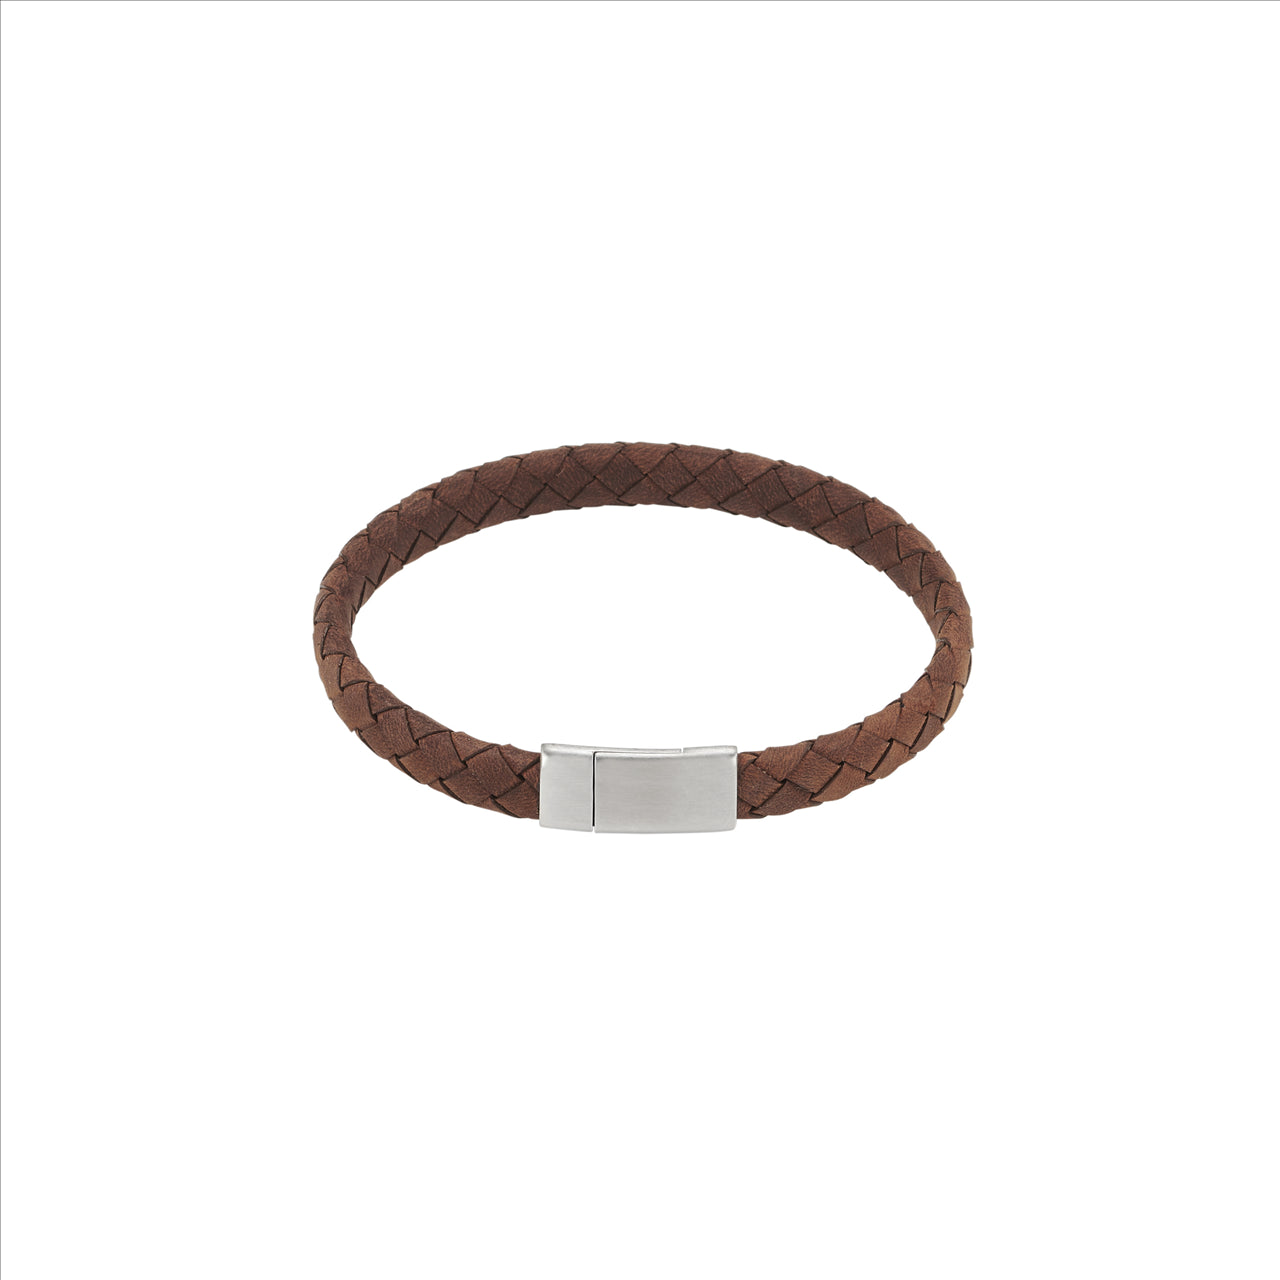 Thin Brown Italian Leather/ Stainless Steel Bracelet